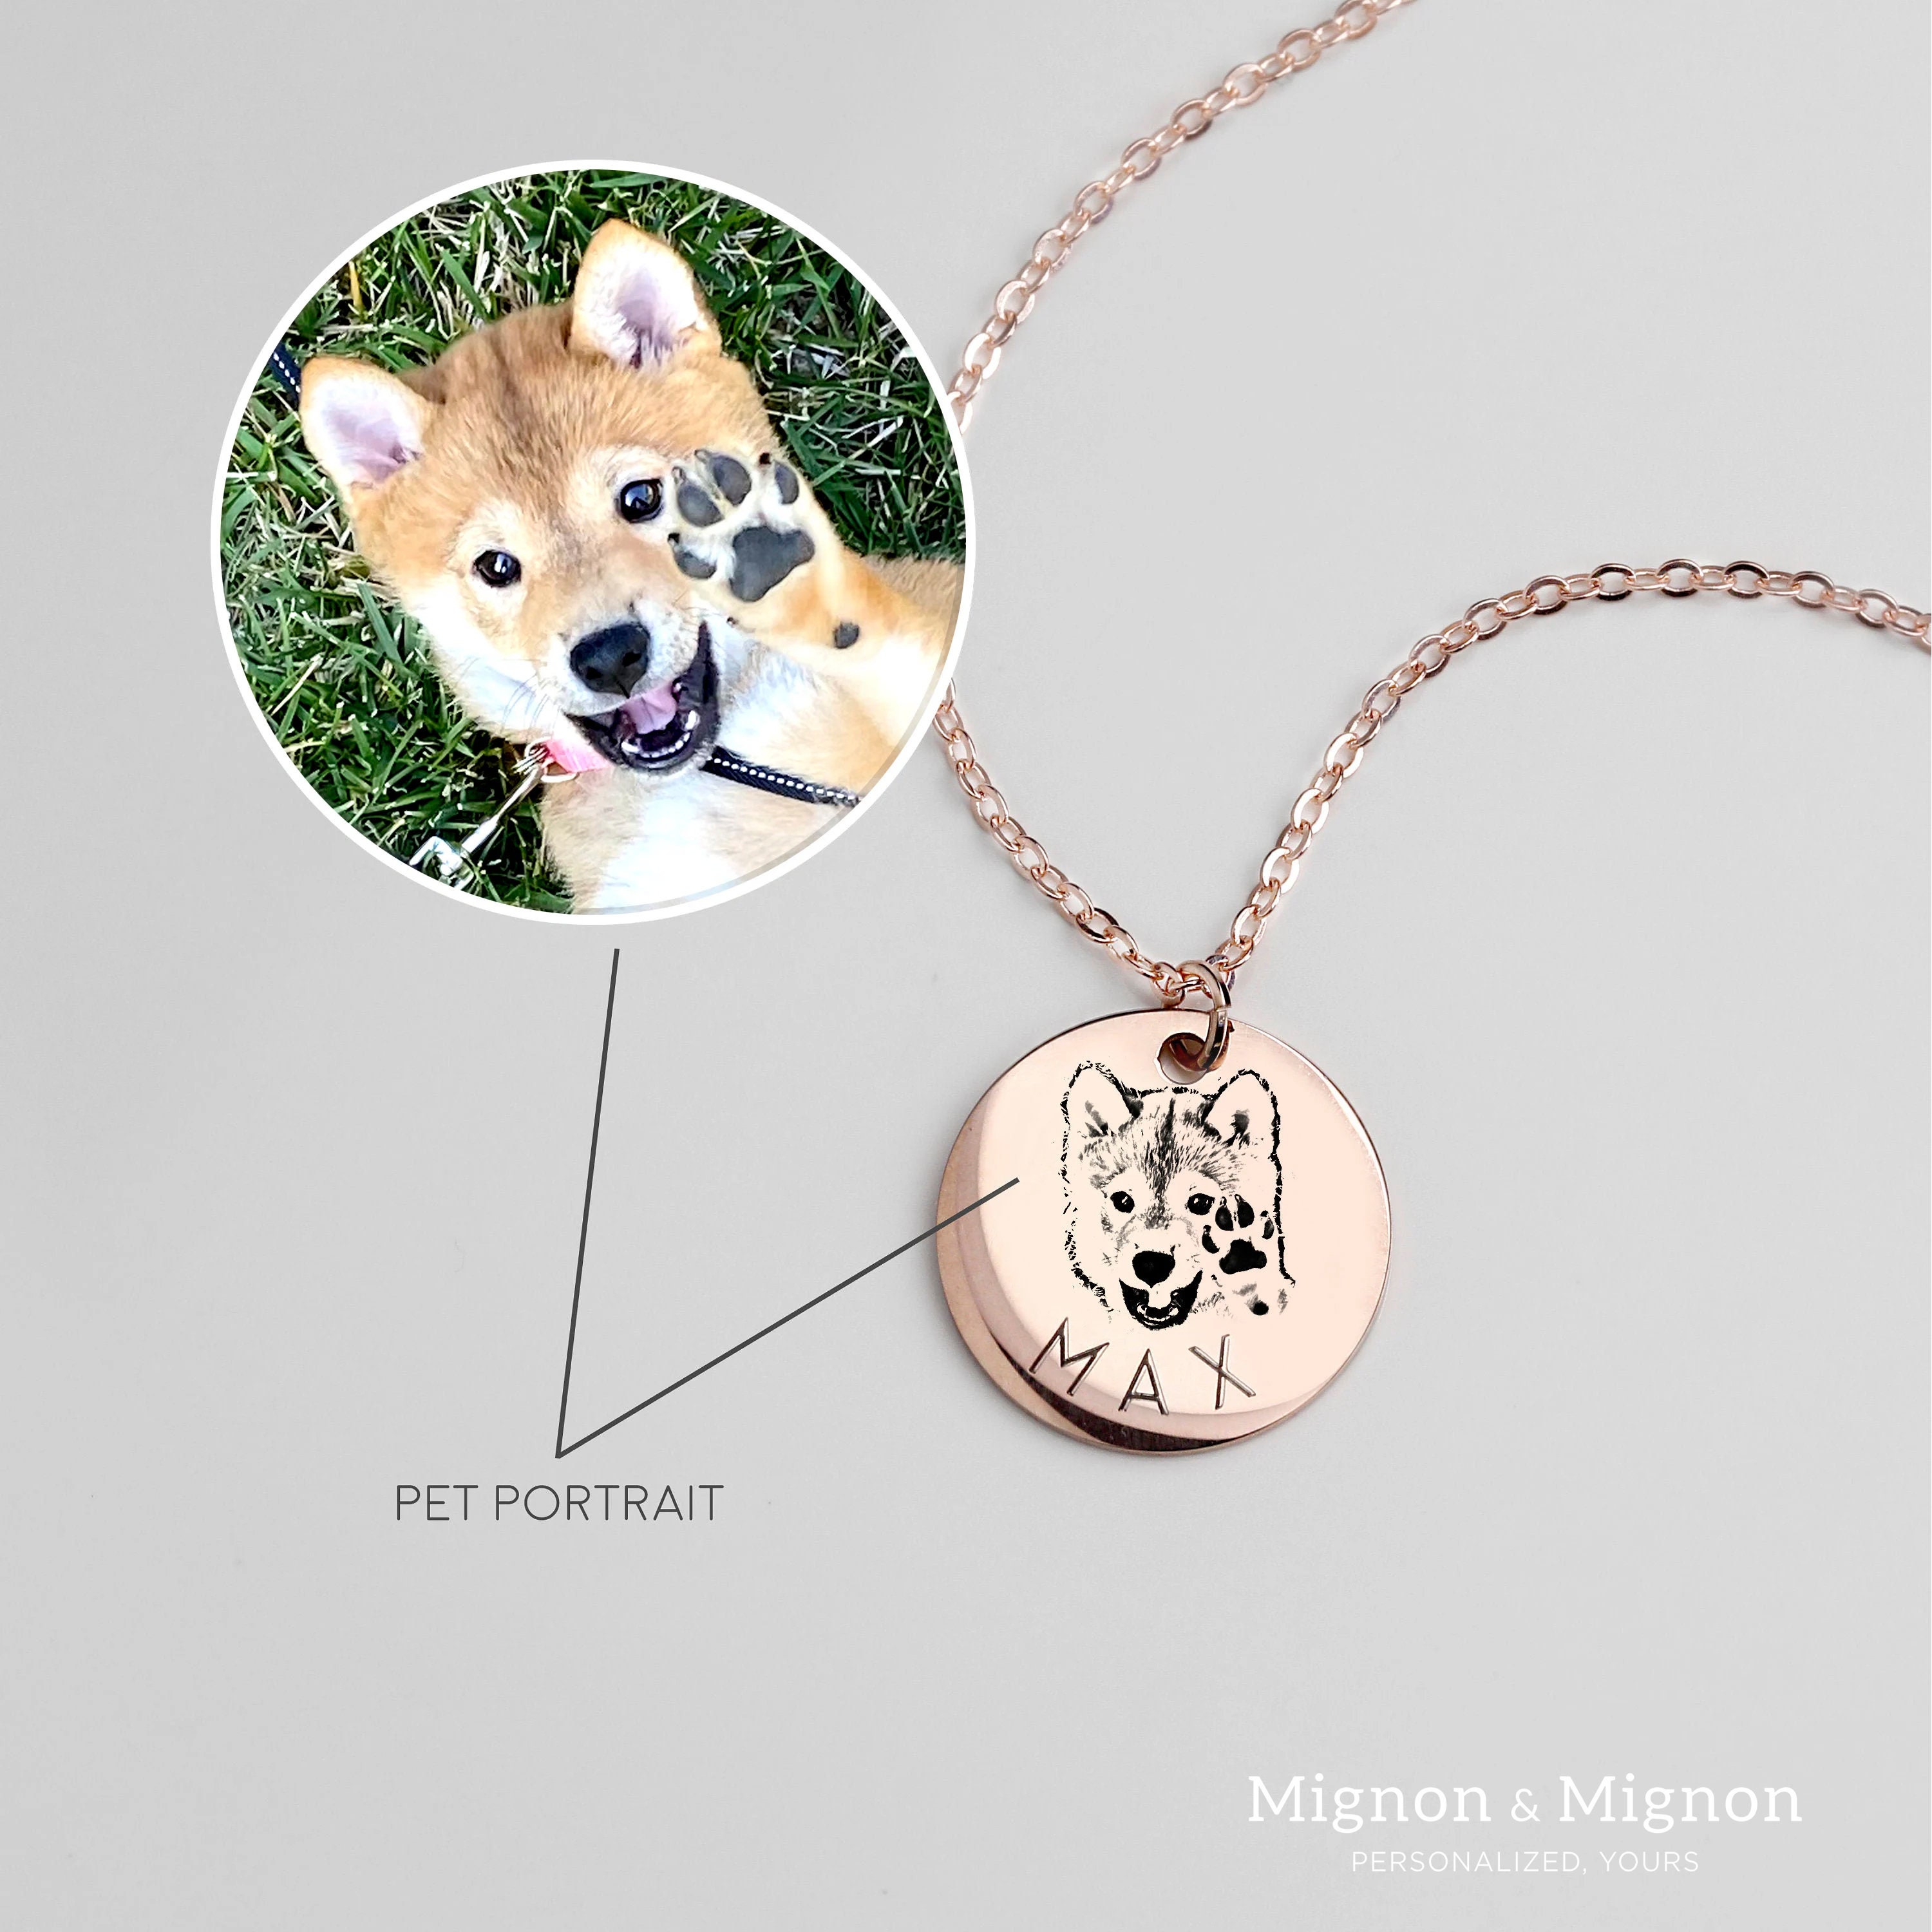 CN-AP Custom Pet Portrait Name Necklace Personalized Dog Cat Memorial Gift Pet Remembrance Photo Engraved Cat Mom Dad Summer Jewelry Gift Pet Supplies Urns & Memorials Pet Memorial Jewellery 